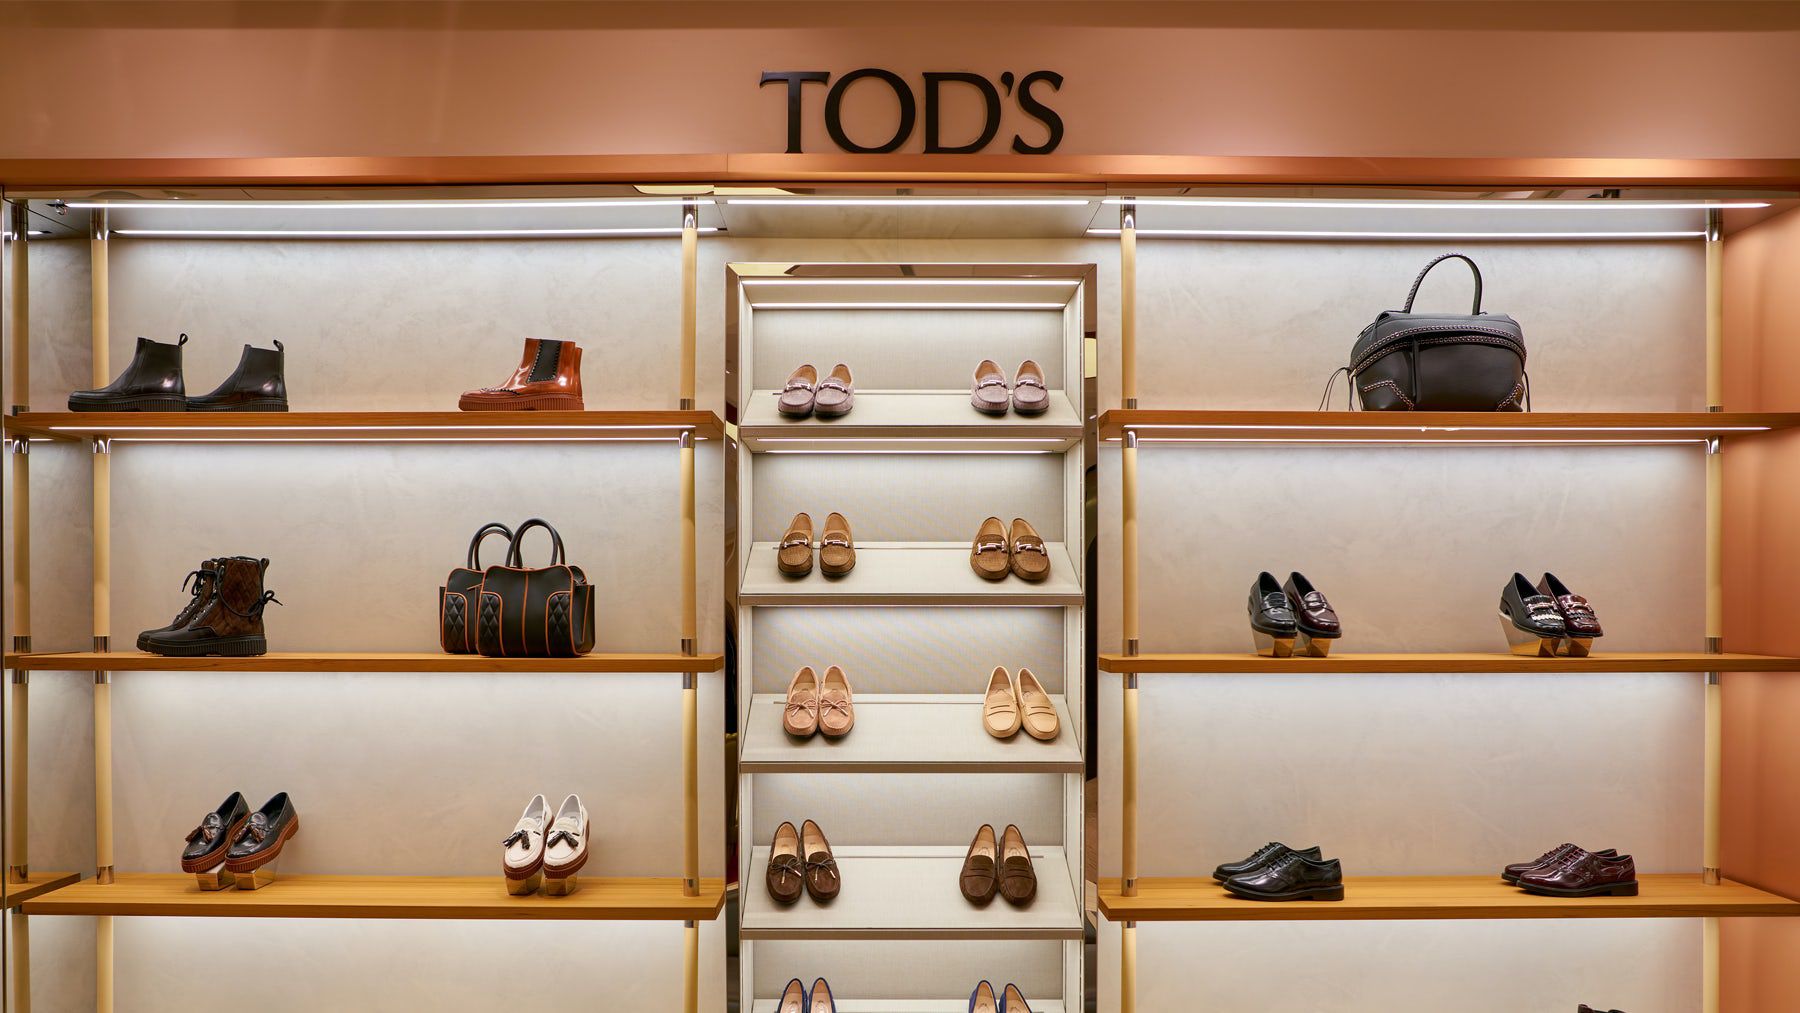 Italian Fashion Group Tod’s Sales Jump in Q1, Beating Expectations